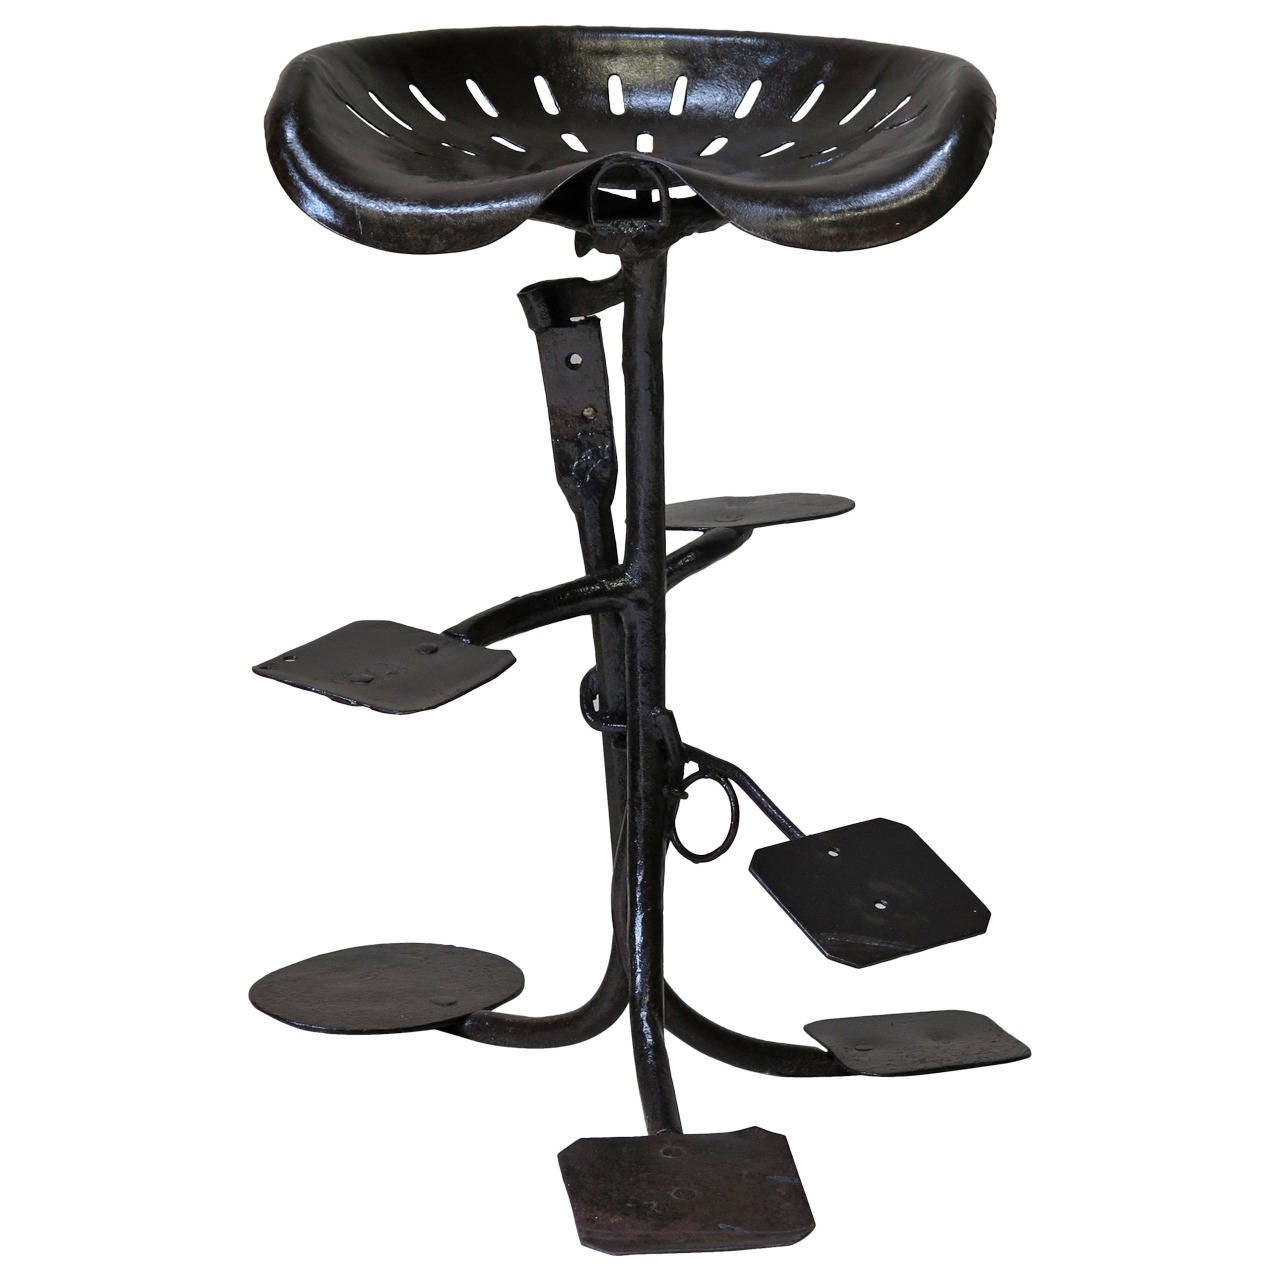 Folk Art Wrought Iron Stool with Tractor Parts, France, circa 1950s